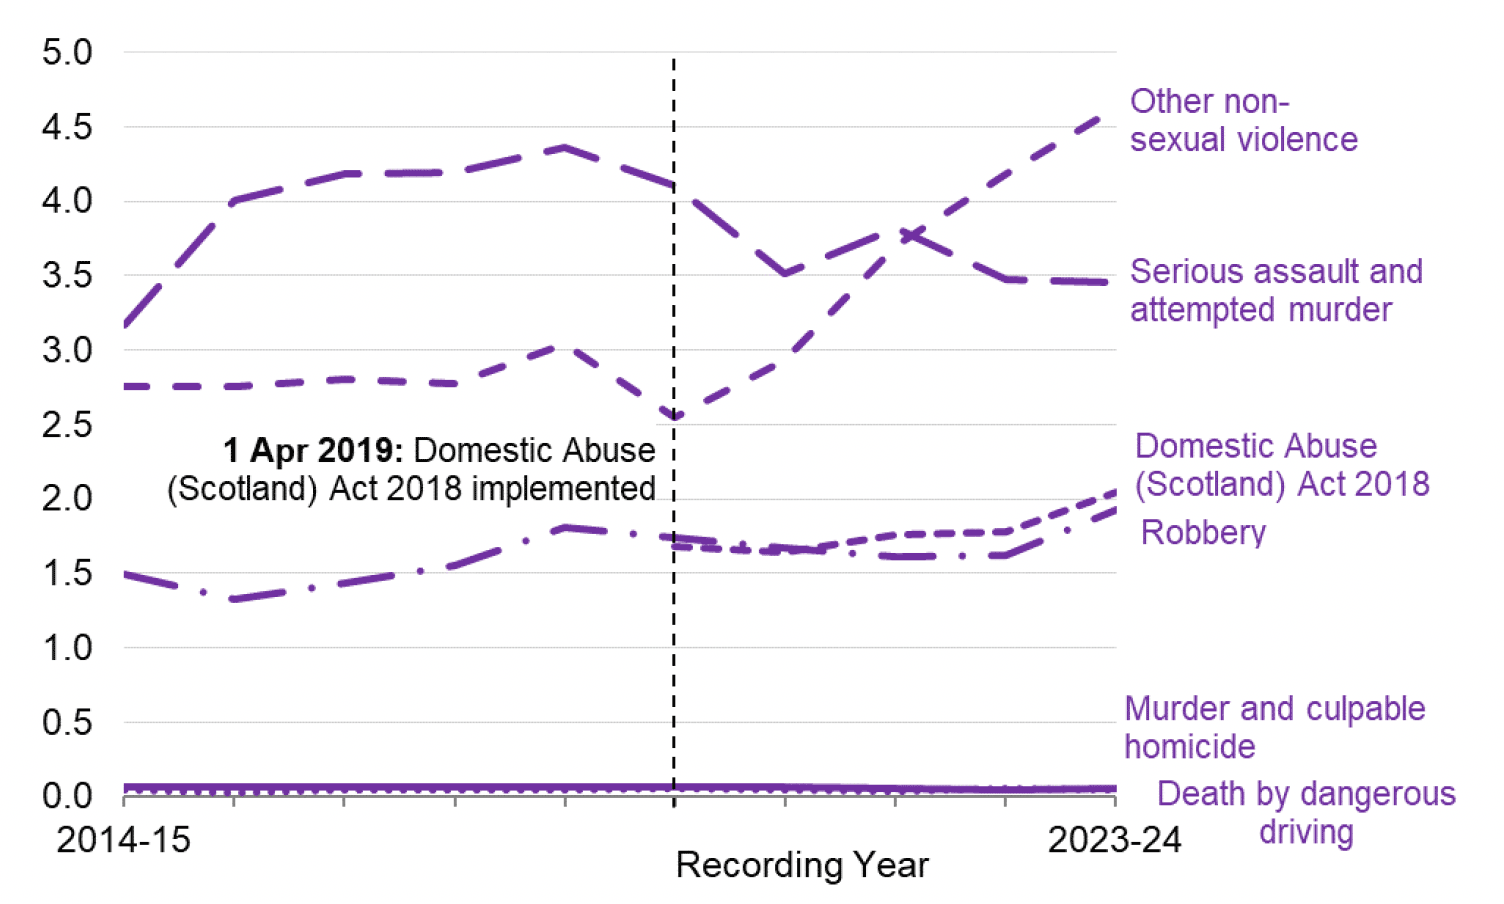 A line chart showing that in the last four years there has been a sharp rise in other non-sexual violence, replacing serious assault and attempted murder as largest category of non-sexual violent crime after common assault.